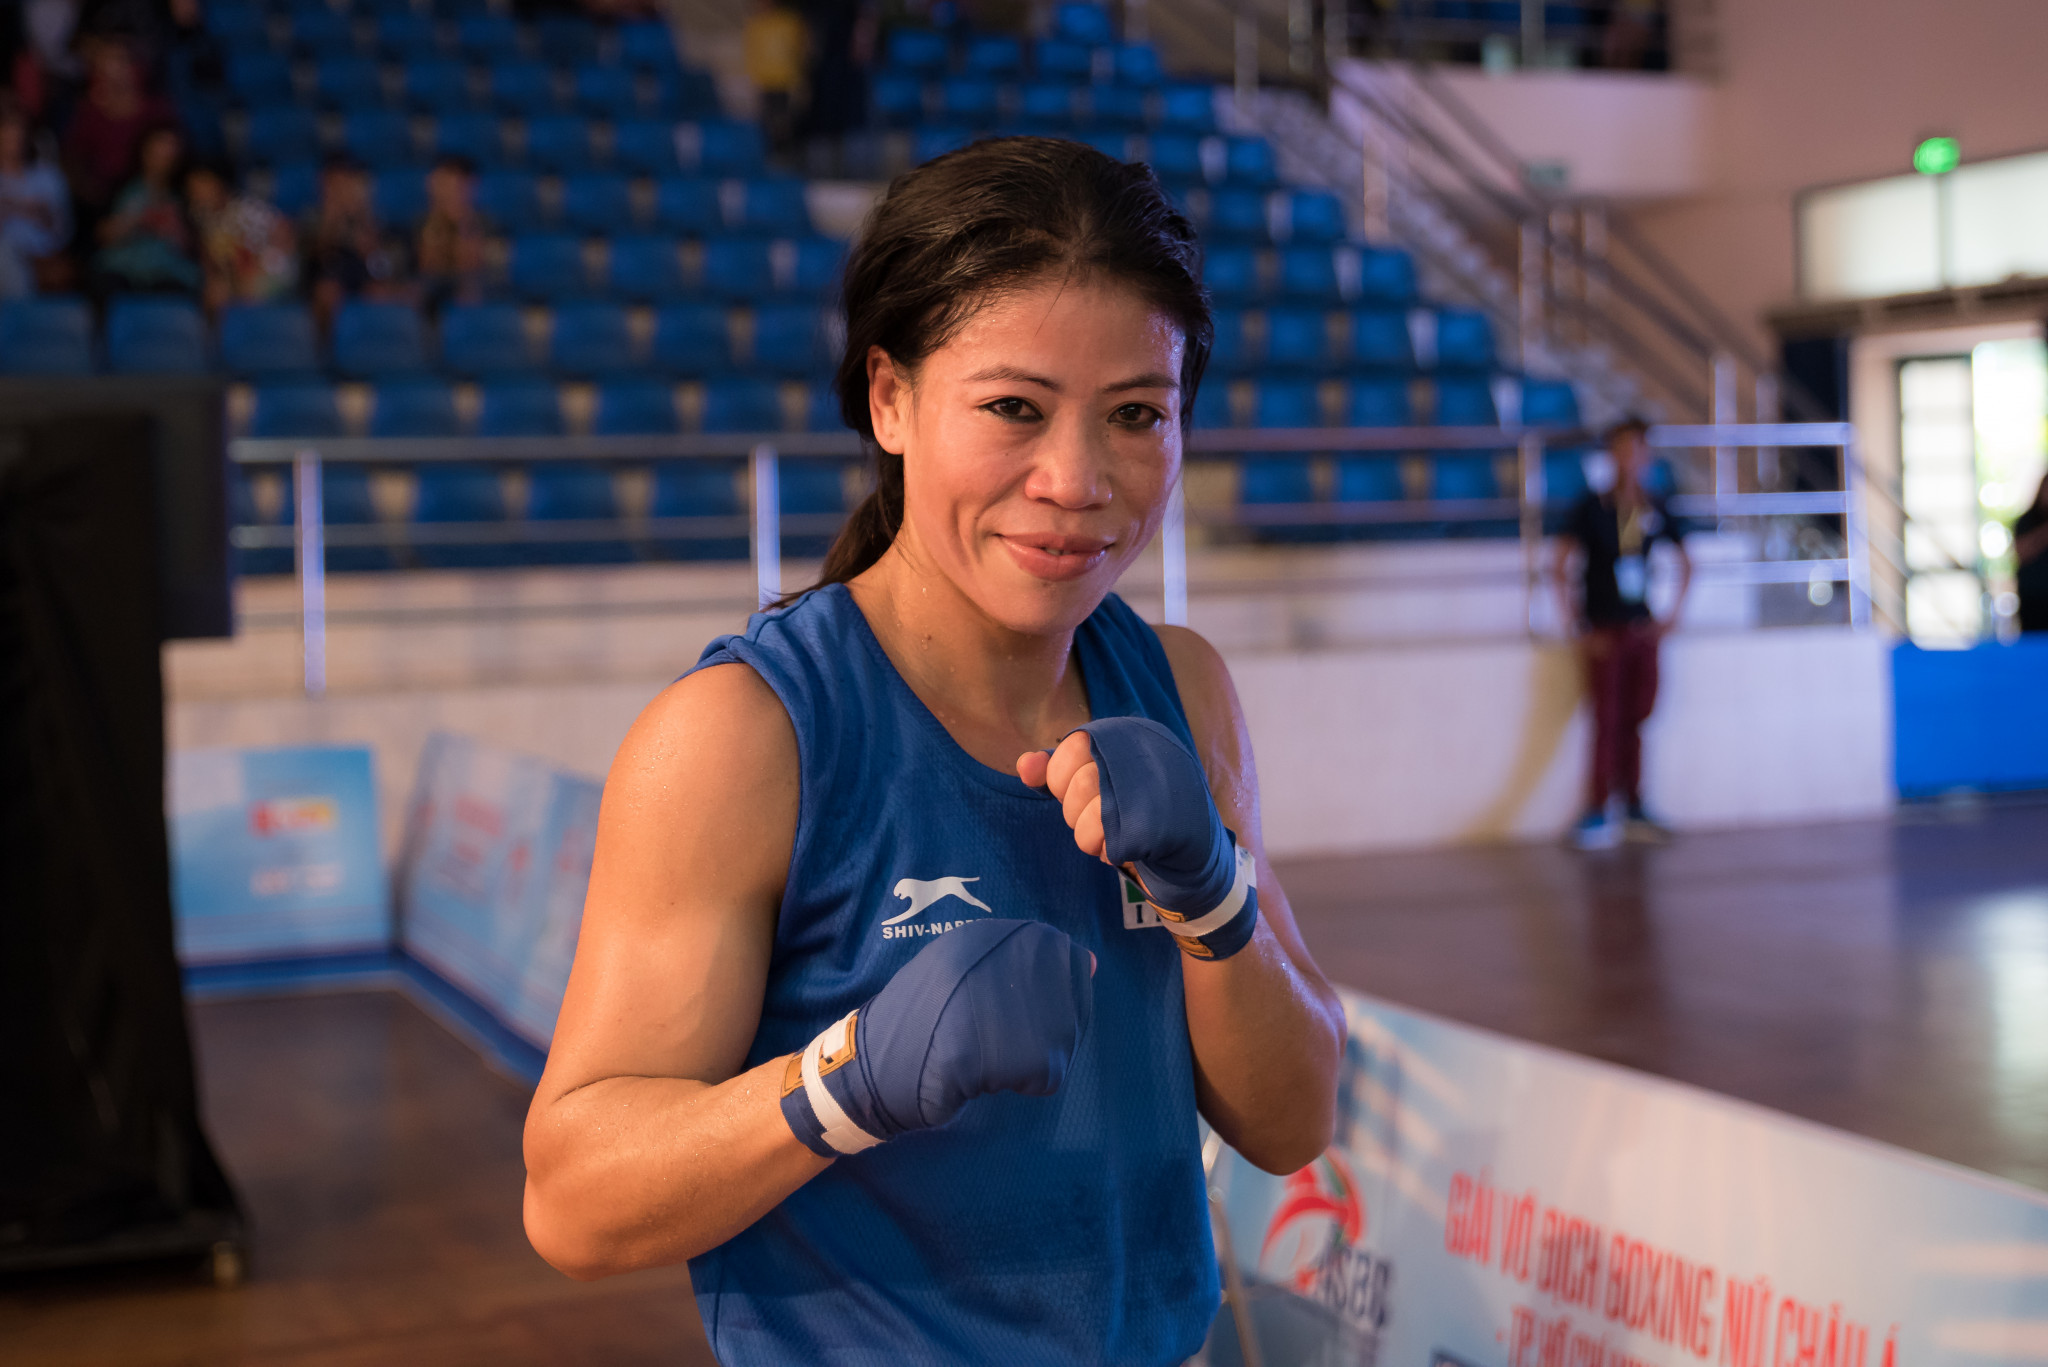 India's Olympic bronze medallist Mary Kom will miss the training camp in Italy due to illness ©AIBA